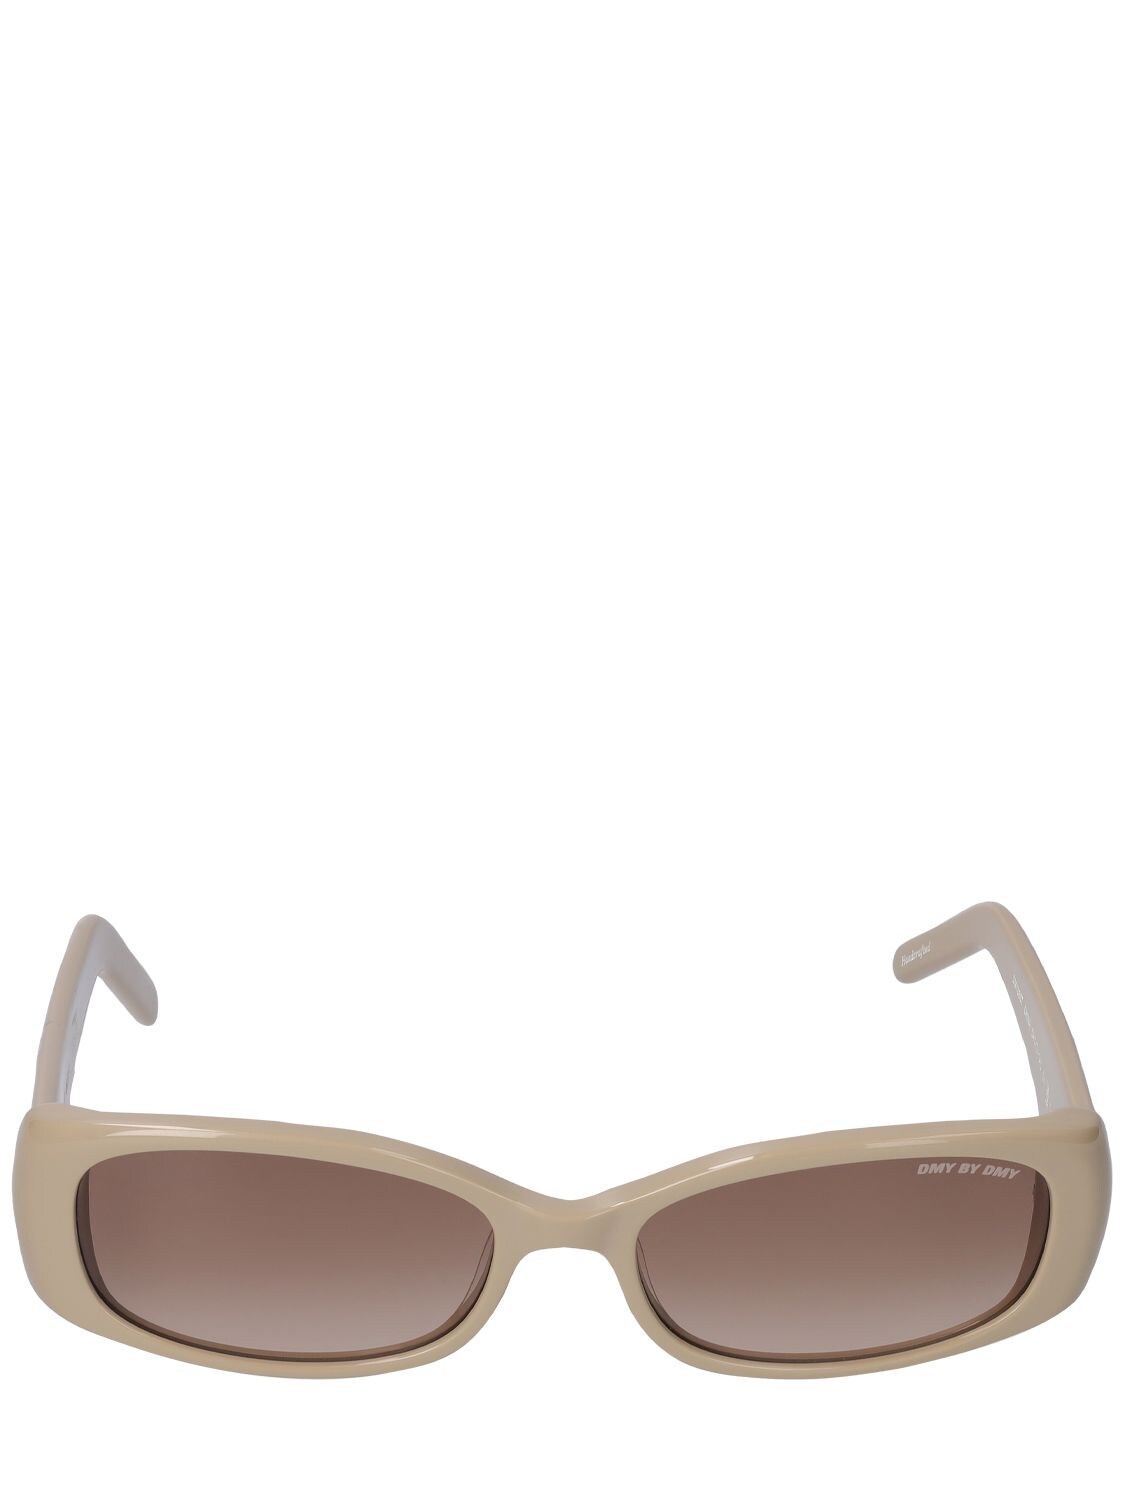 DMY BY DMY Billy Oval Acetate Sunglasses